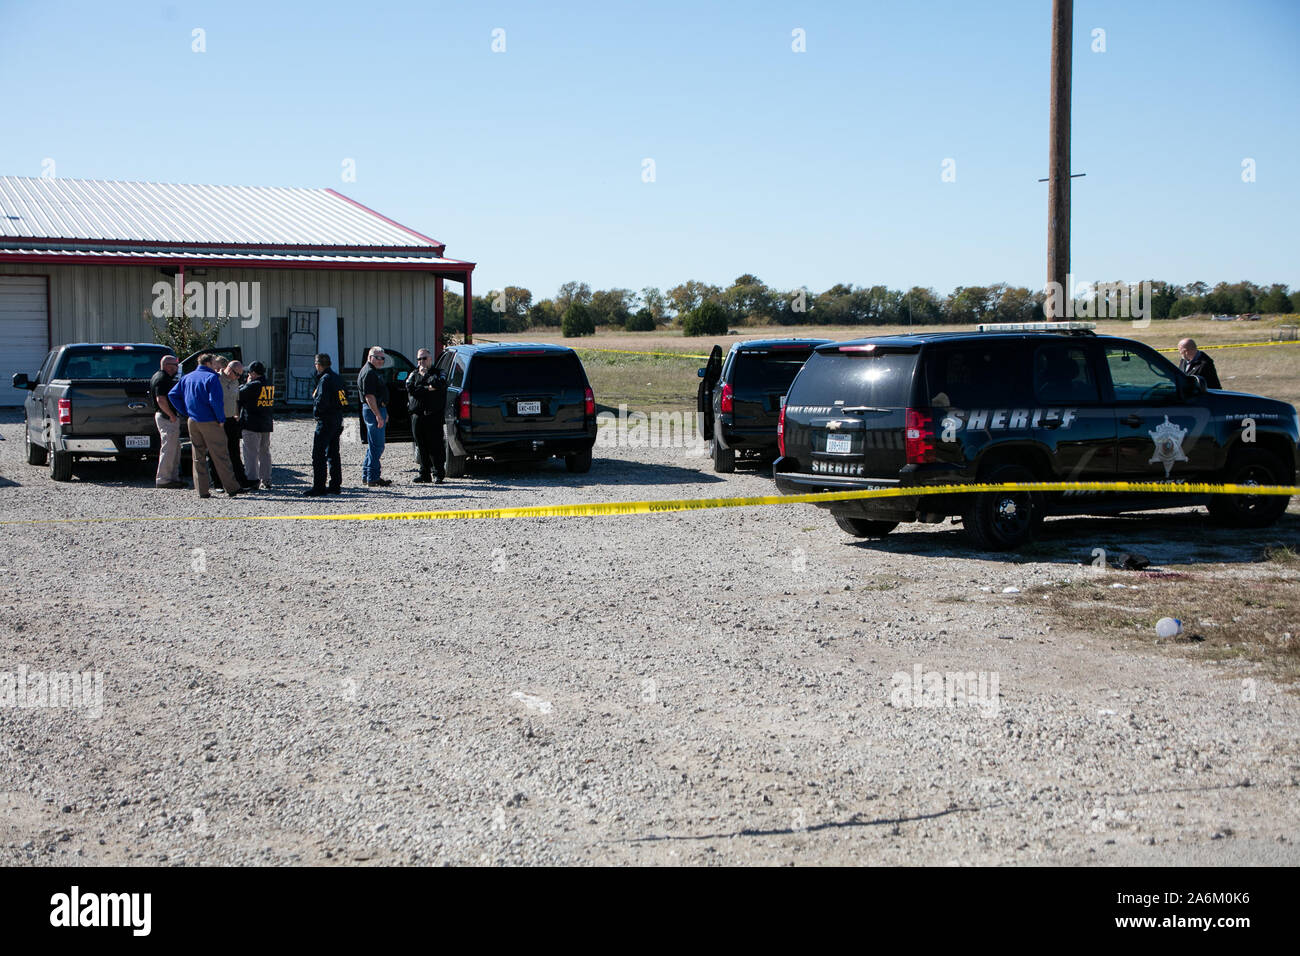 Greenville, Texas, USA. 27th Oct, 2019. Security cordon is set up around the scene of a shooting incident in Greenville, Texas, the United States, on Oct. 27, 2019. Two people were killed and about 12 others injured in a shooting overnight at an off-campus party near Texas A&M University-Commerce, near Greenville City, Texas. (Photo by Dan Tian/Xinhua) Credit: Xinhua/Alamy Live News Stock Photo